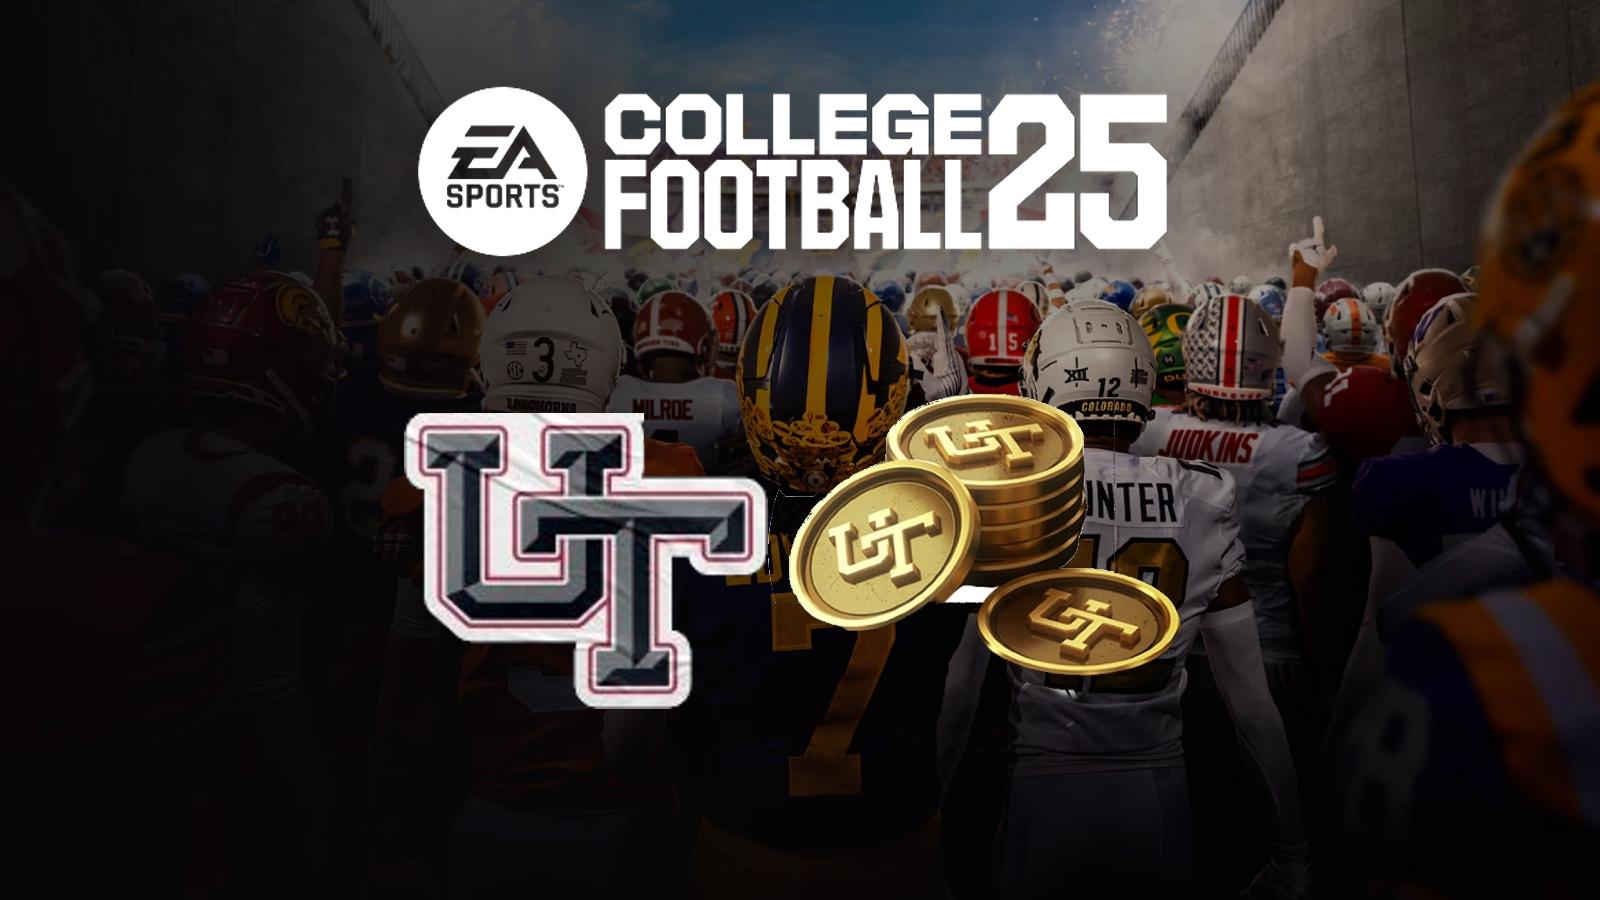 college football cover with ultimate team logo and coins